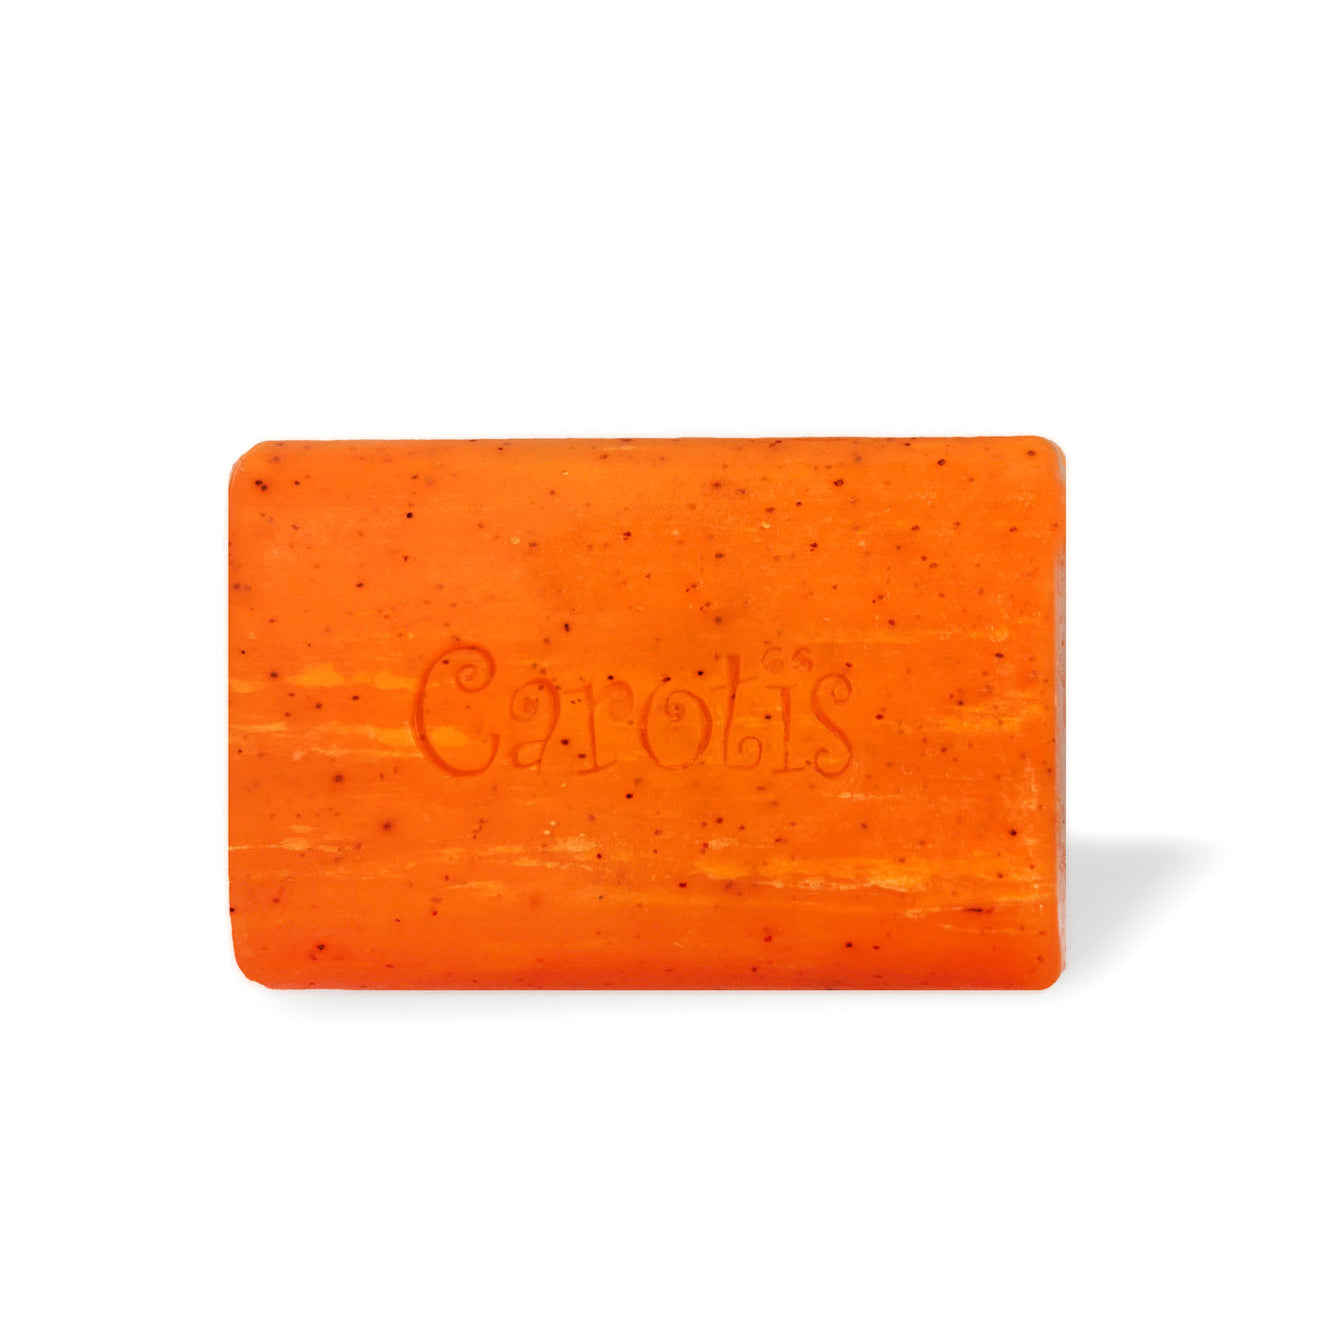 Carotis 7 days Exfoliating Soap 200g Mitchell Brands - Mitchell Brands - Skin Lightening, Skin Brightening, Fade Dark Spots, Shea Butter, Hair Growth Products